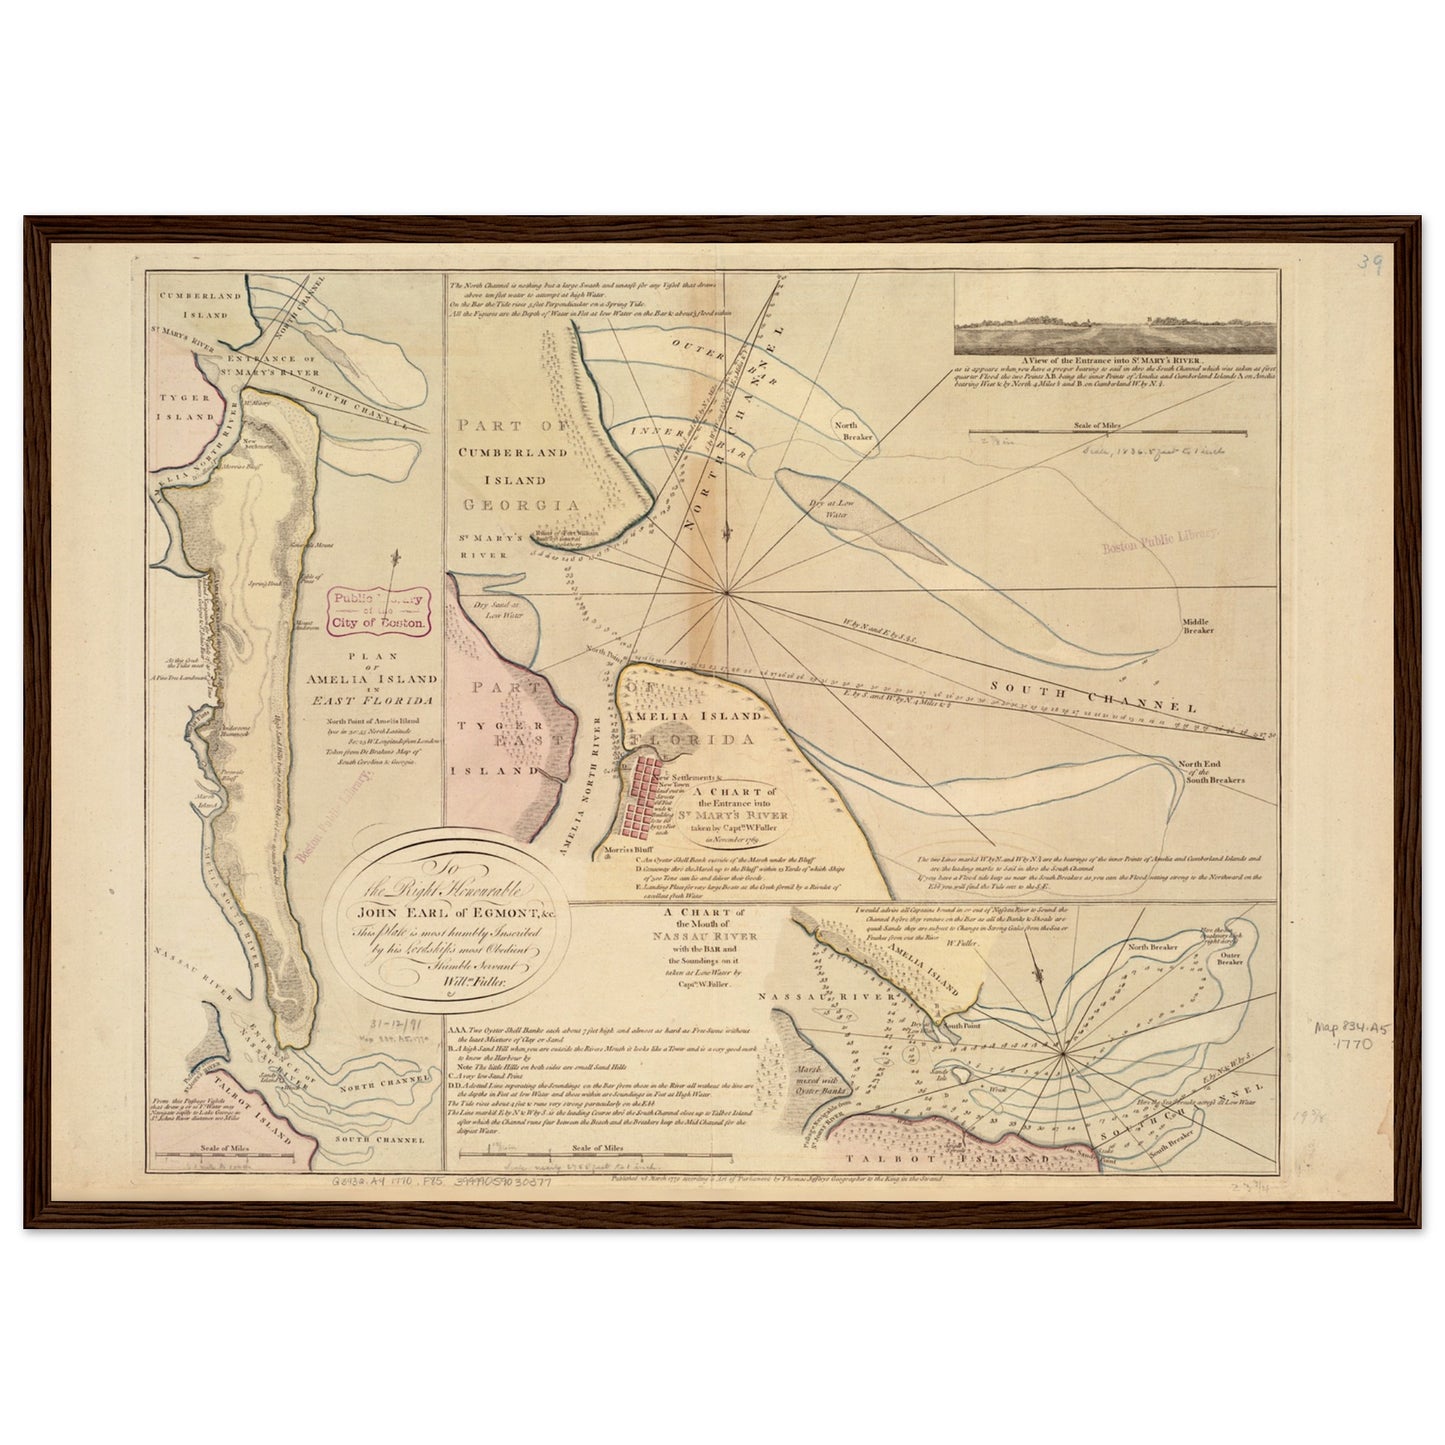 Old map of historic Amelia Island, Florida with nautical chart of the mouth of the Saint Mary's River.